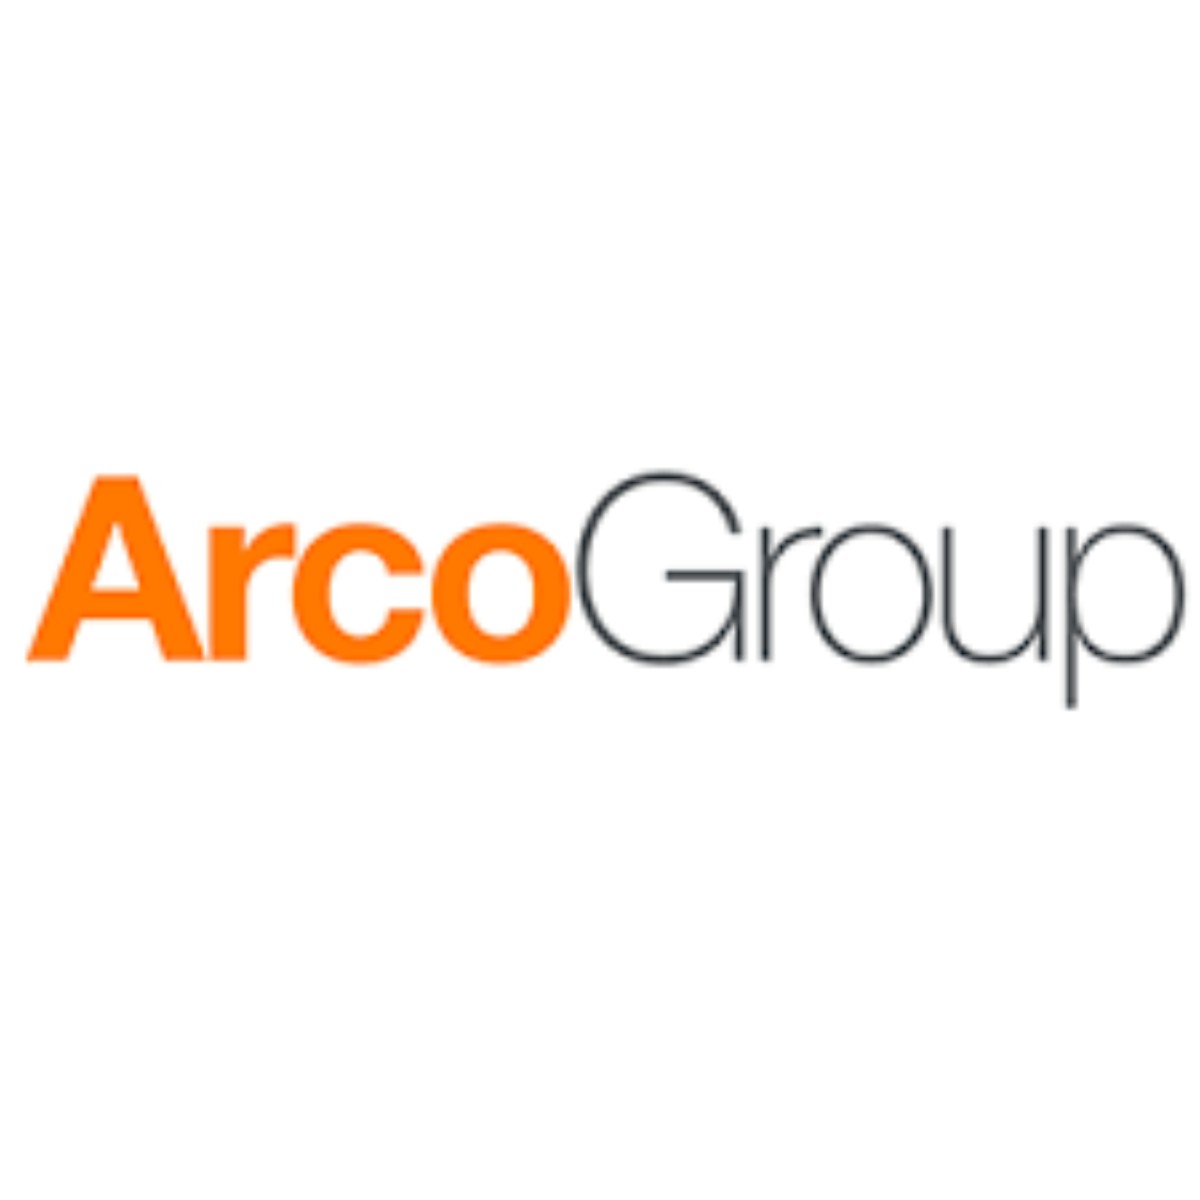 ARCO Group 2023 Career Opportunities for Young Graduates